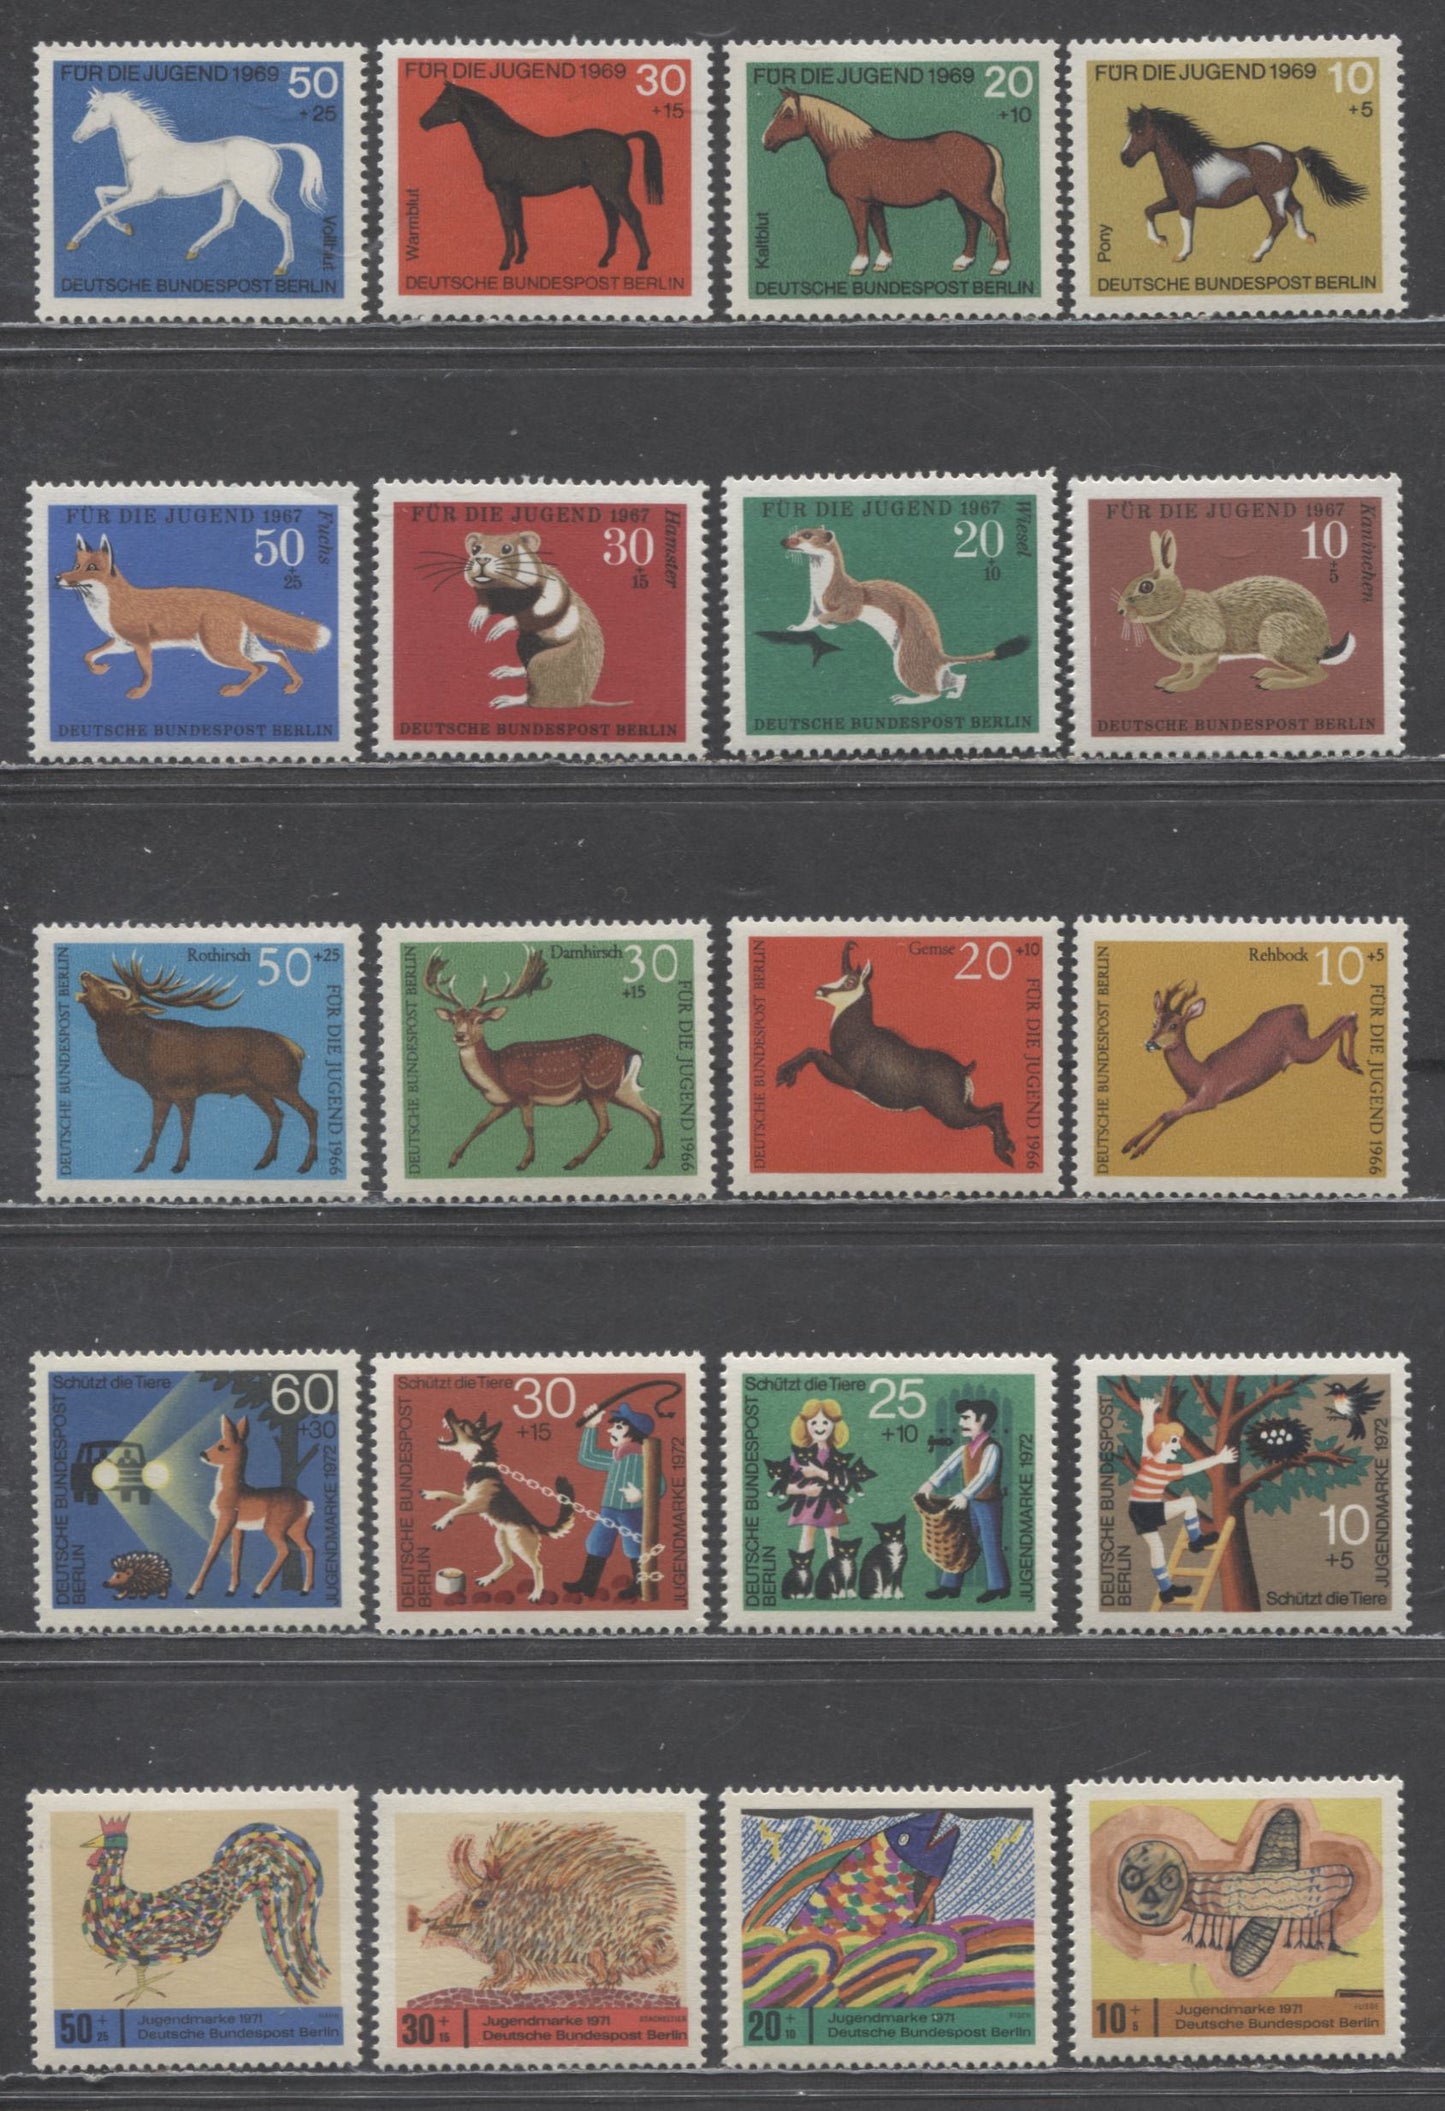 Lot 7 Germany-Berlin SC#9NB37/9NB91 1966-1972 Animals, Horses, Childrens Drawings & Animal Protection Issues, 20 VFNH/OG Singles, Click on Listing to See ALL Pictures, 2017 Scott Cat. $9.5